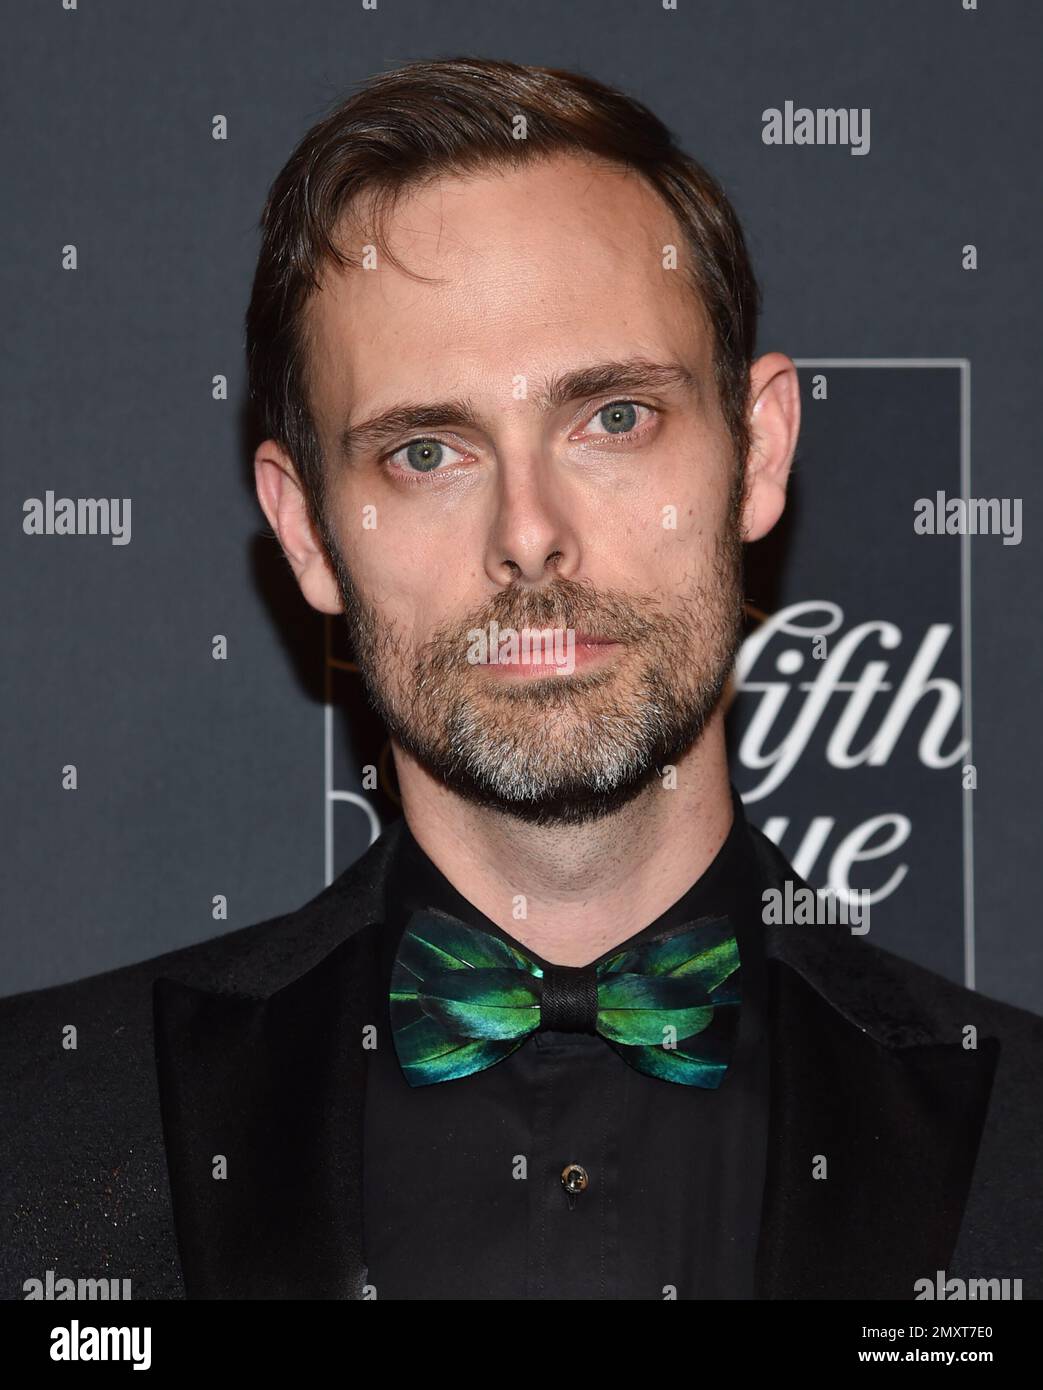 Author Ransom Riggs attends "Miss Peregrine's Home for Peculiar Children" red carpet event at Saks 5th Avenue on Monday, Sept. 26, 2016, in New York. (Photo by Evan Agostini/Invision/AP) Stock Photo